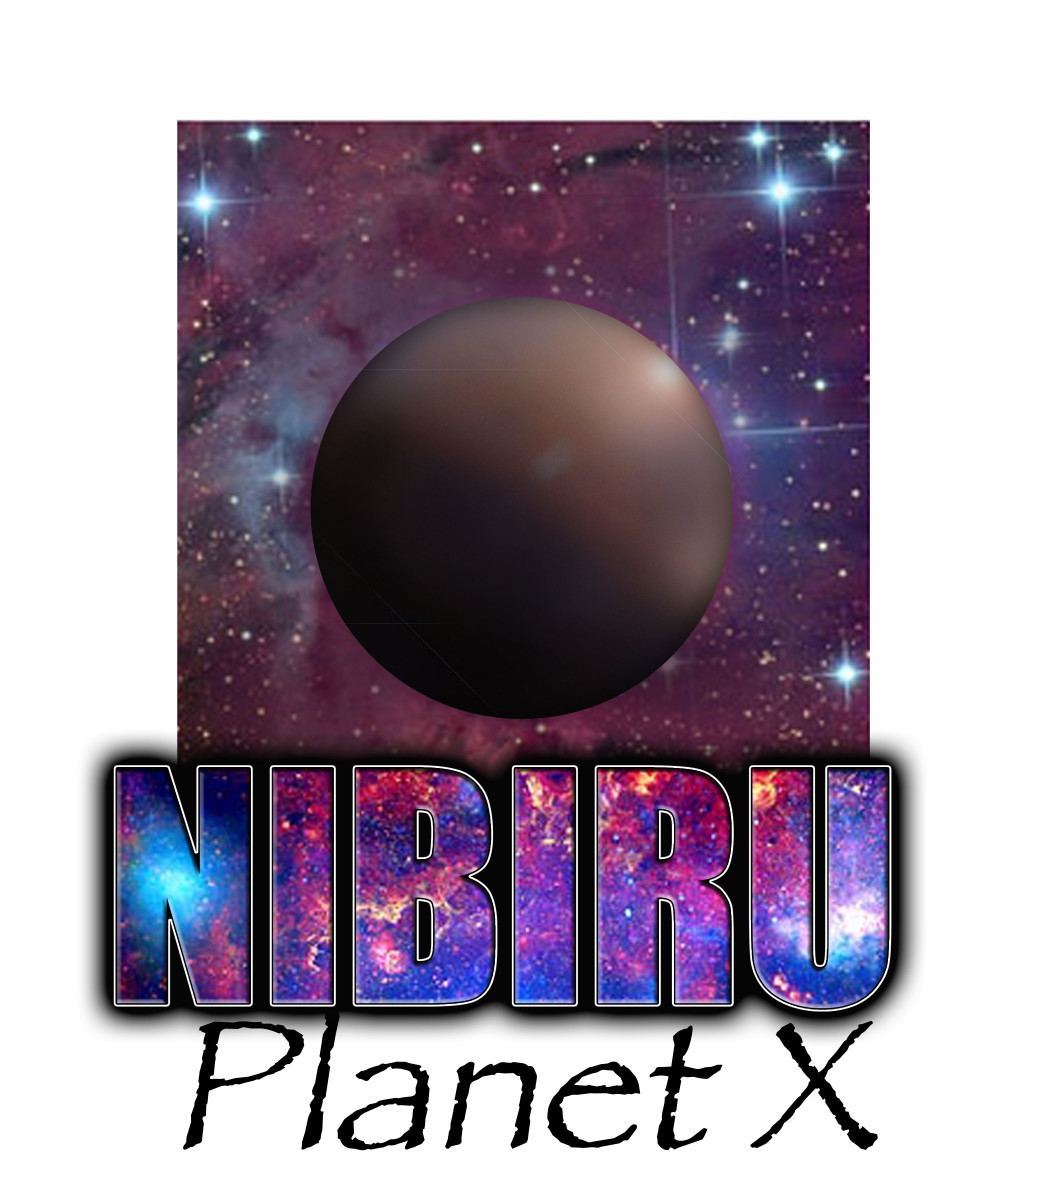 All the recent blackouts from electromagnetic pulses are due to the influence Nibiru Planet X is having on our planet.